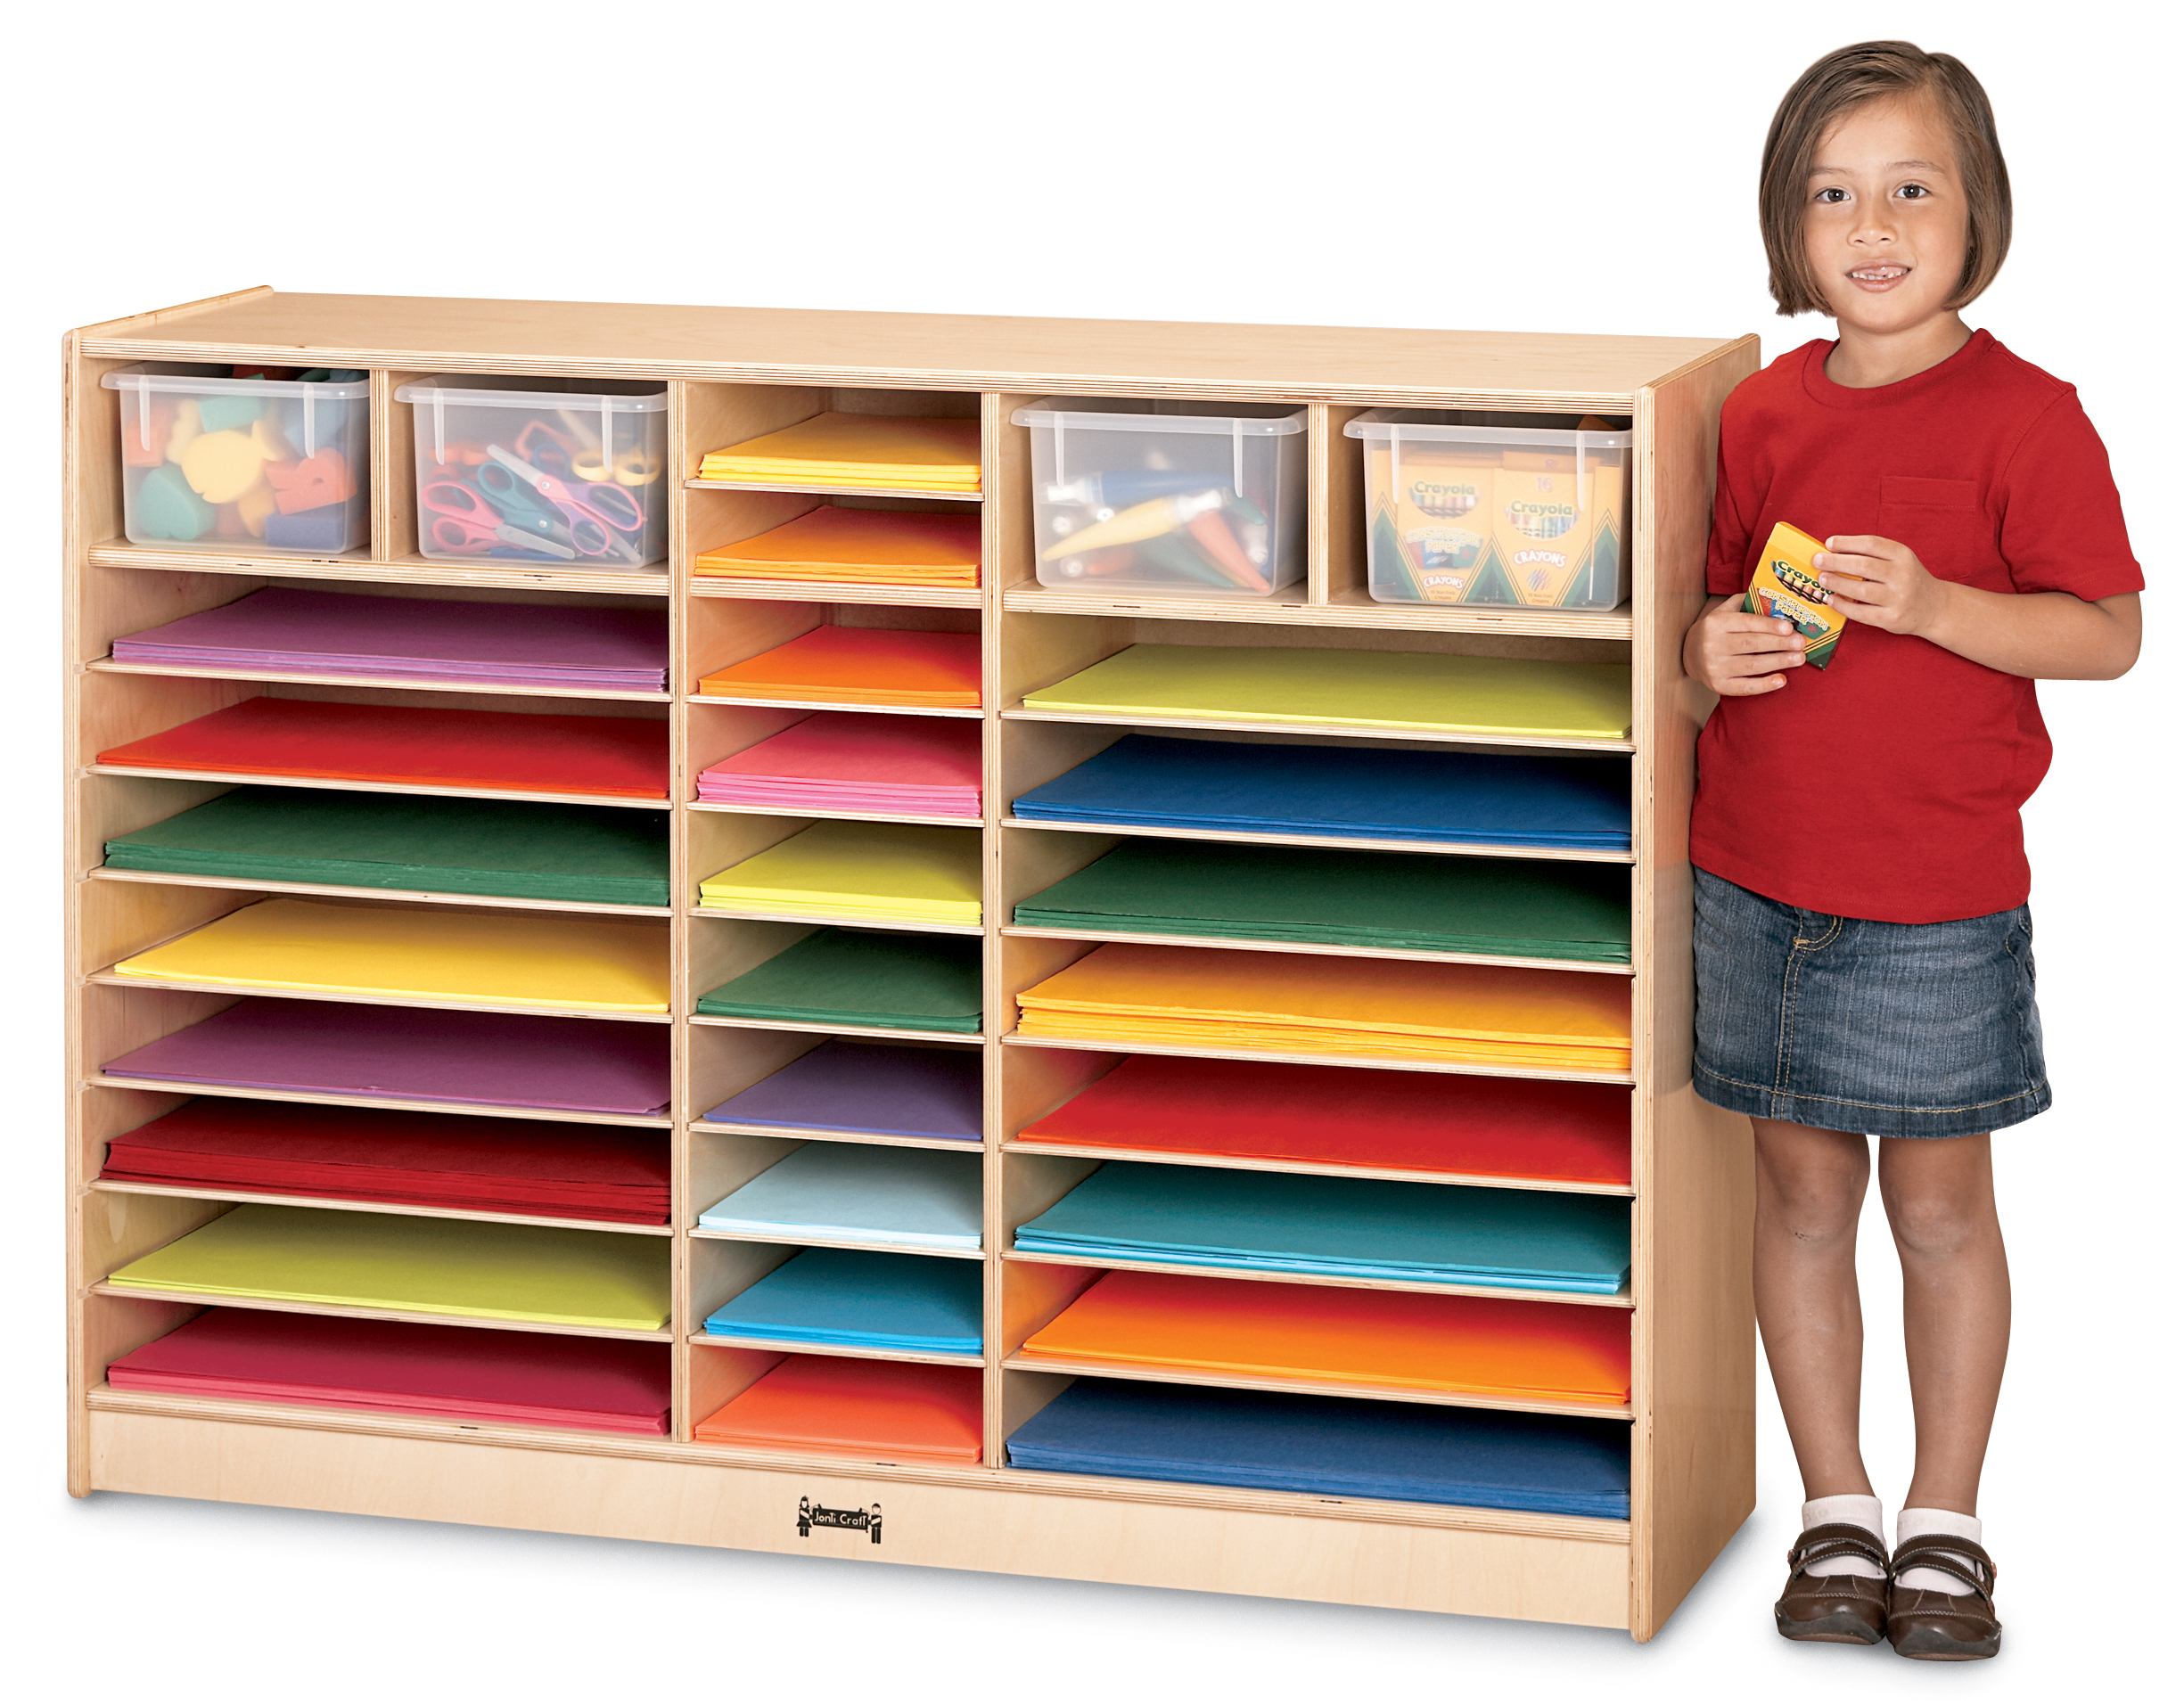 Jonti-Craft 24 Paper Tray Mobile Storage with Colored Paper Trays